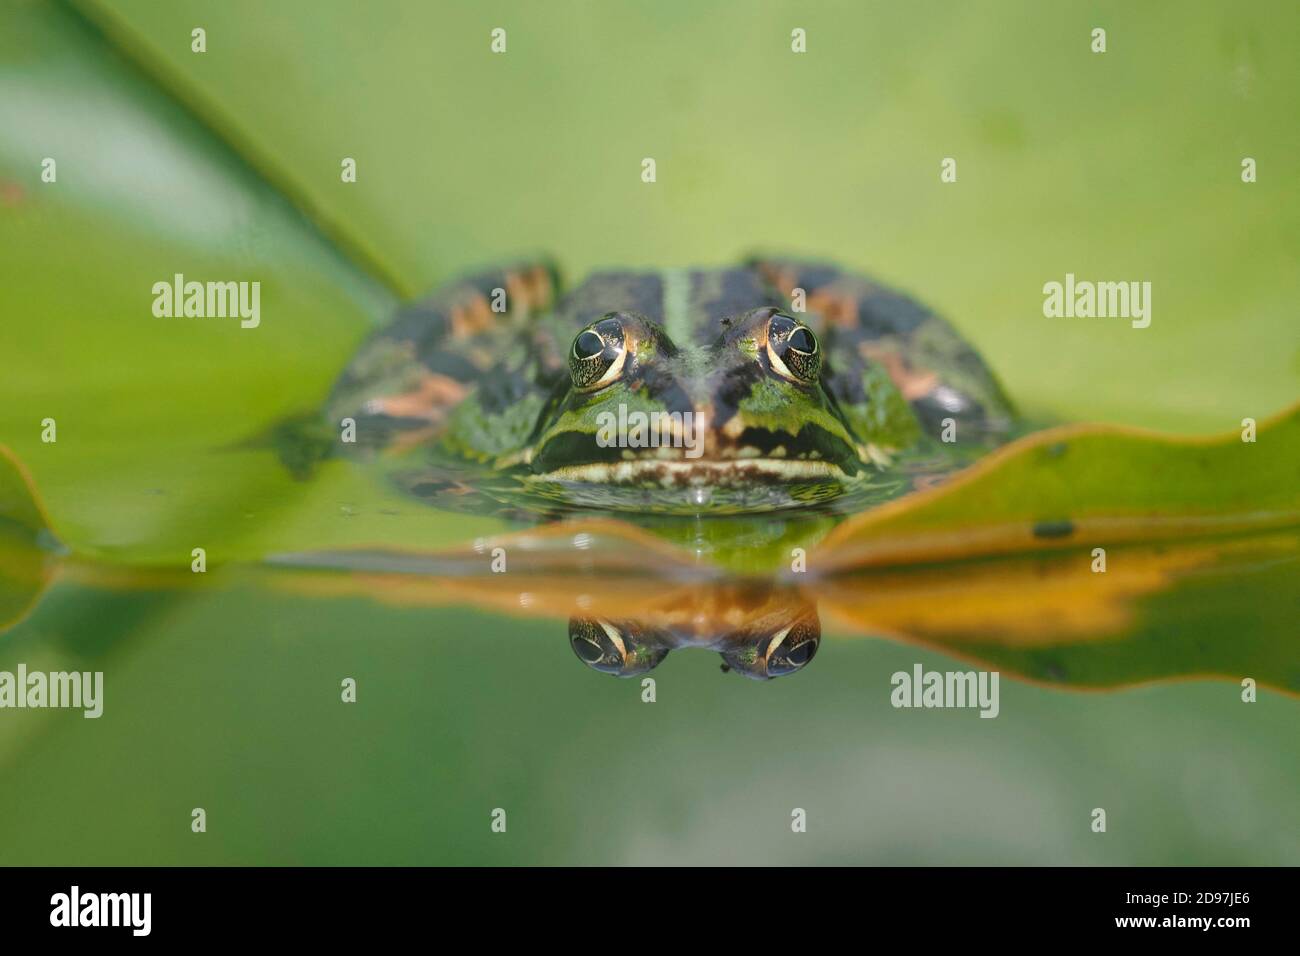 Green frog (Pelophylax kl. esculentus) on a water lily leaf, Alsace, France Stock Photo